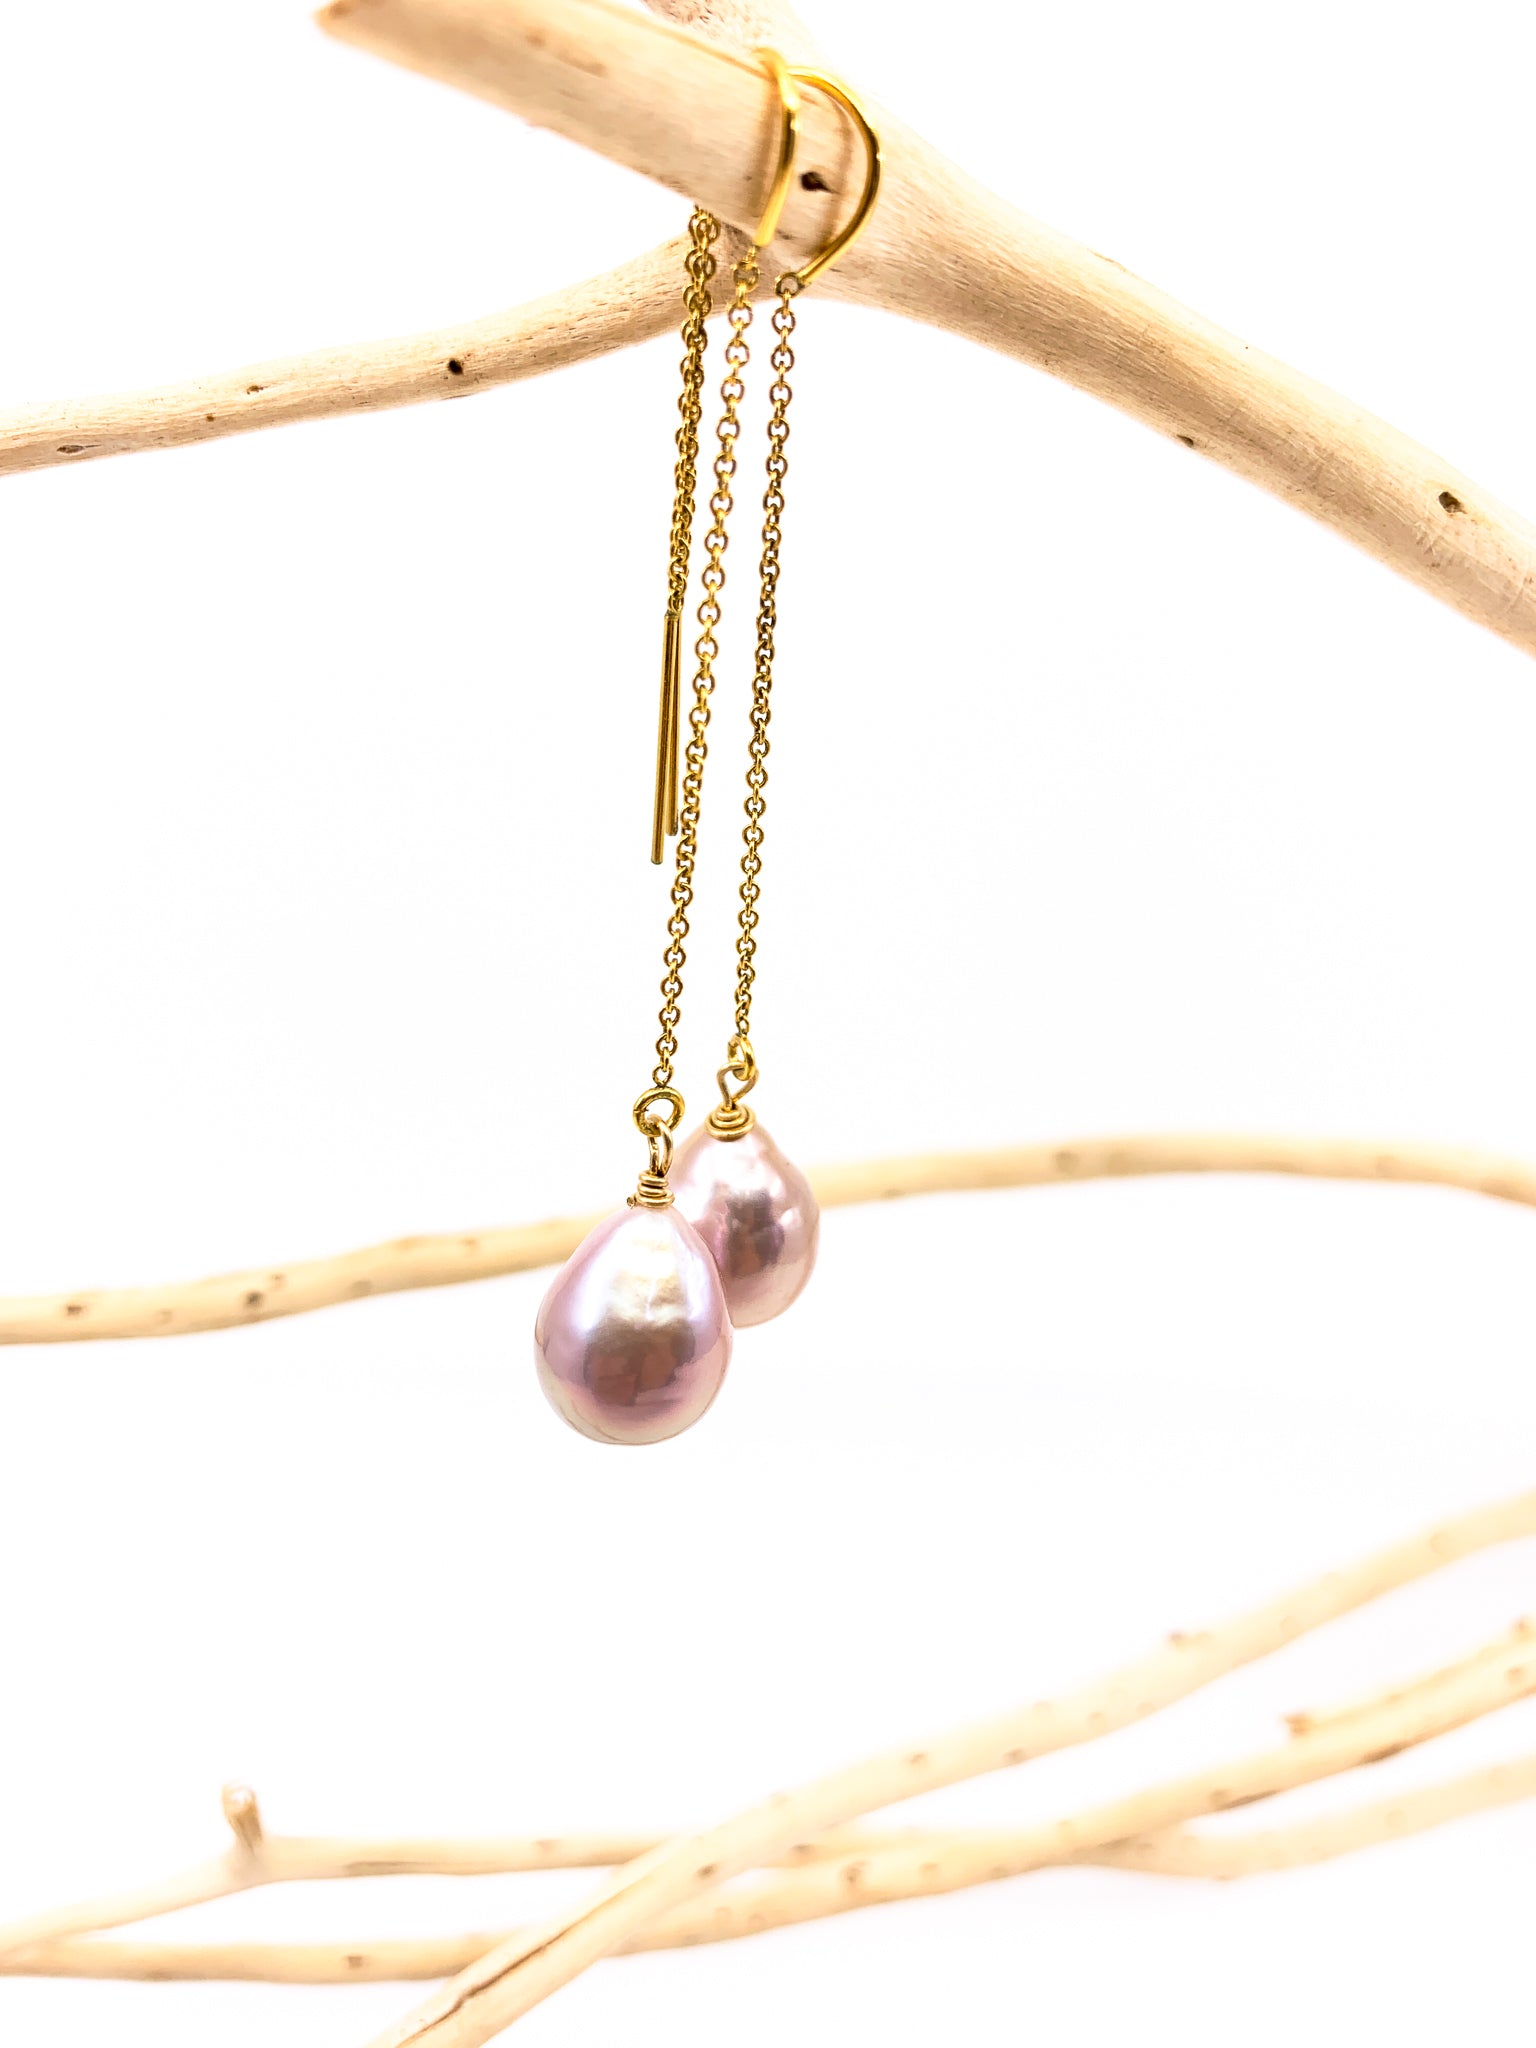 natural 'pink' Edison Baroque pearls gold threader earrings by eve black jewelry made in Hawaii